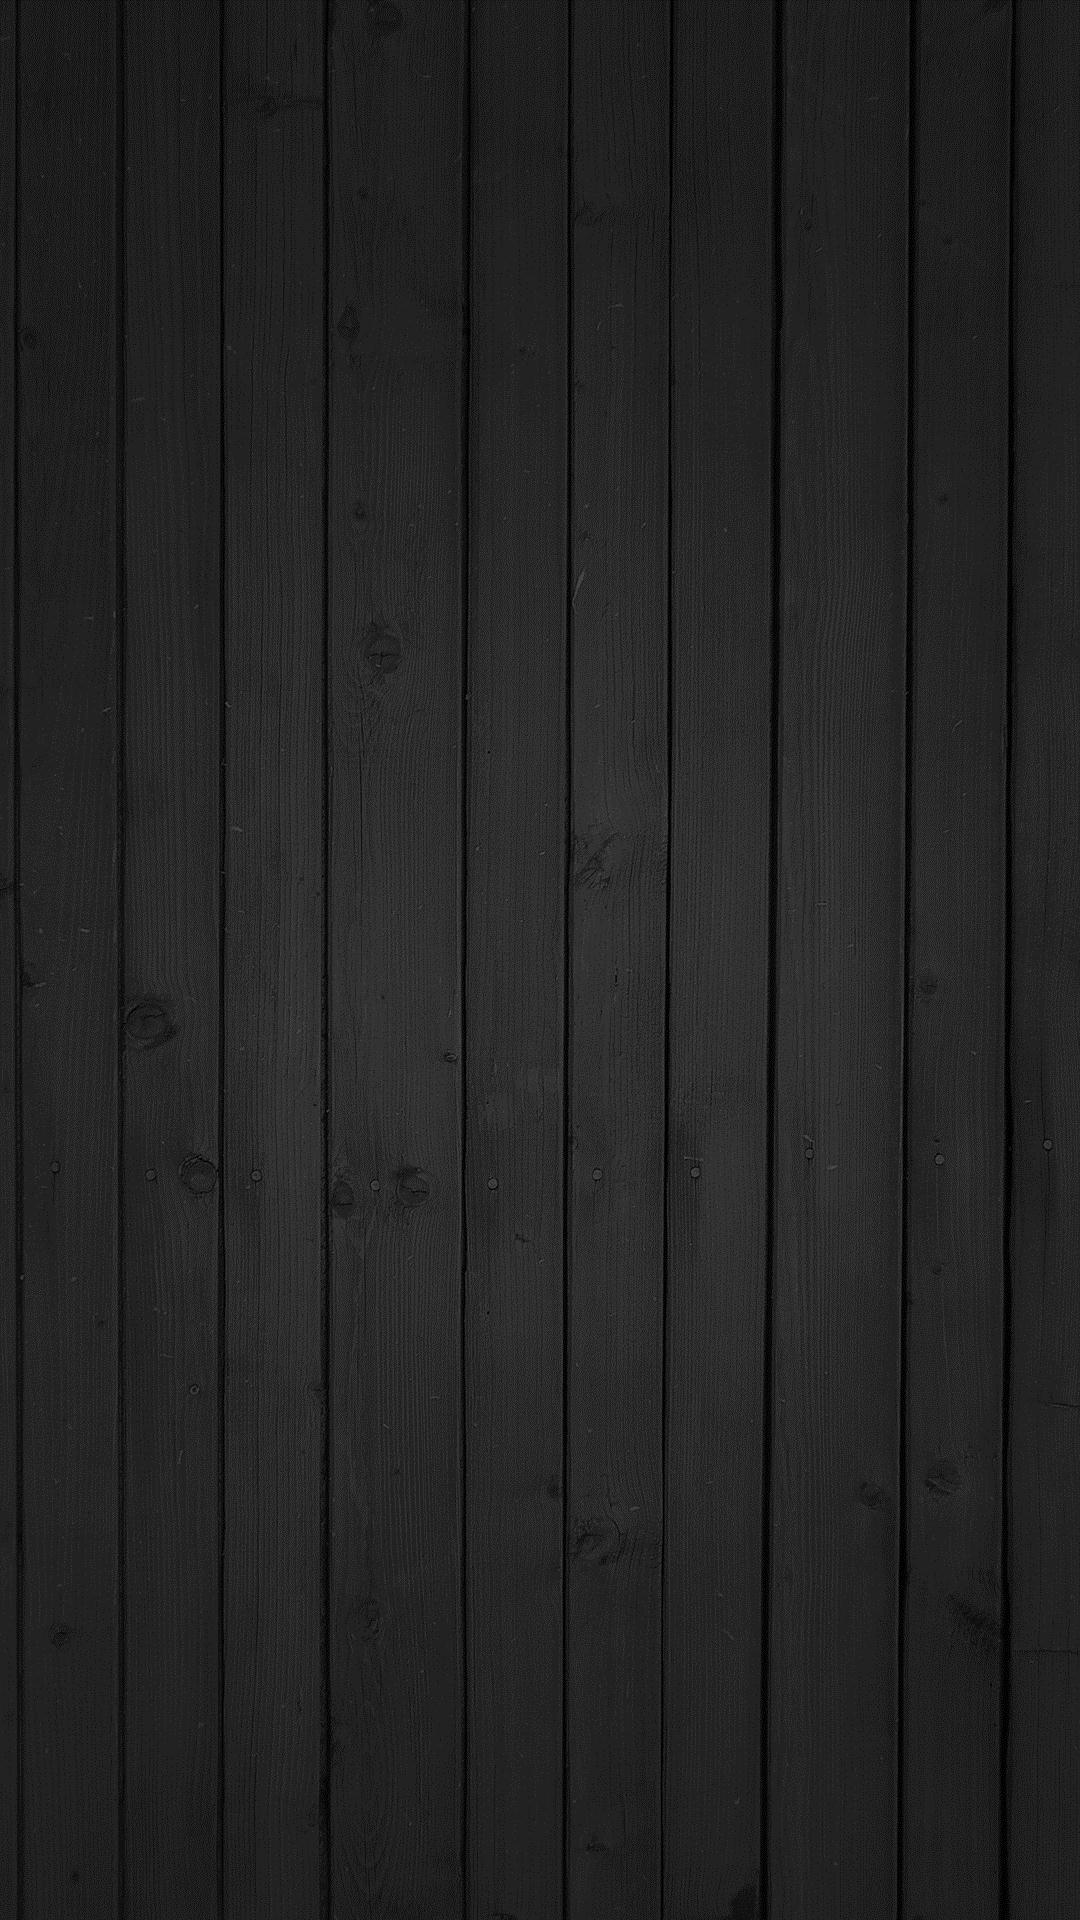 Black Wood Texture Android Wallpaper free download